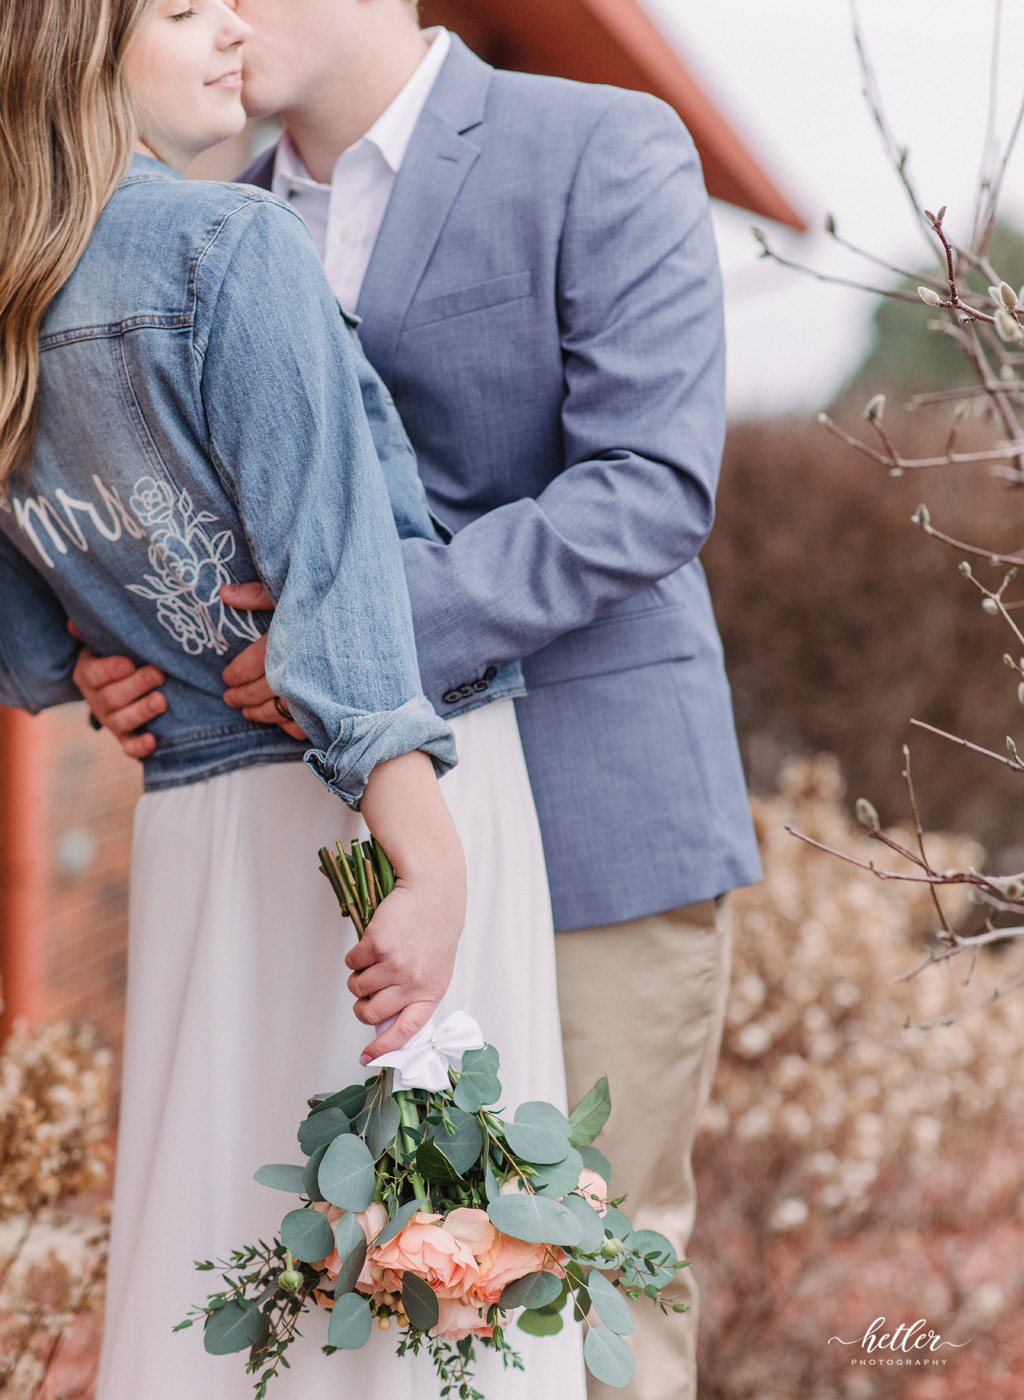 West Michigan intimate wedding photographer for a small March wedding